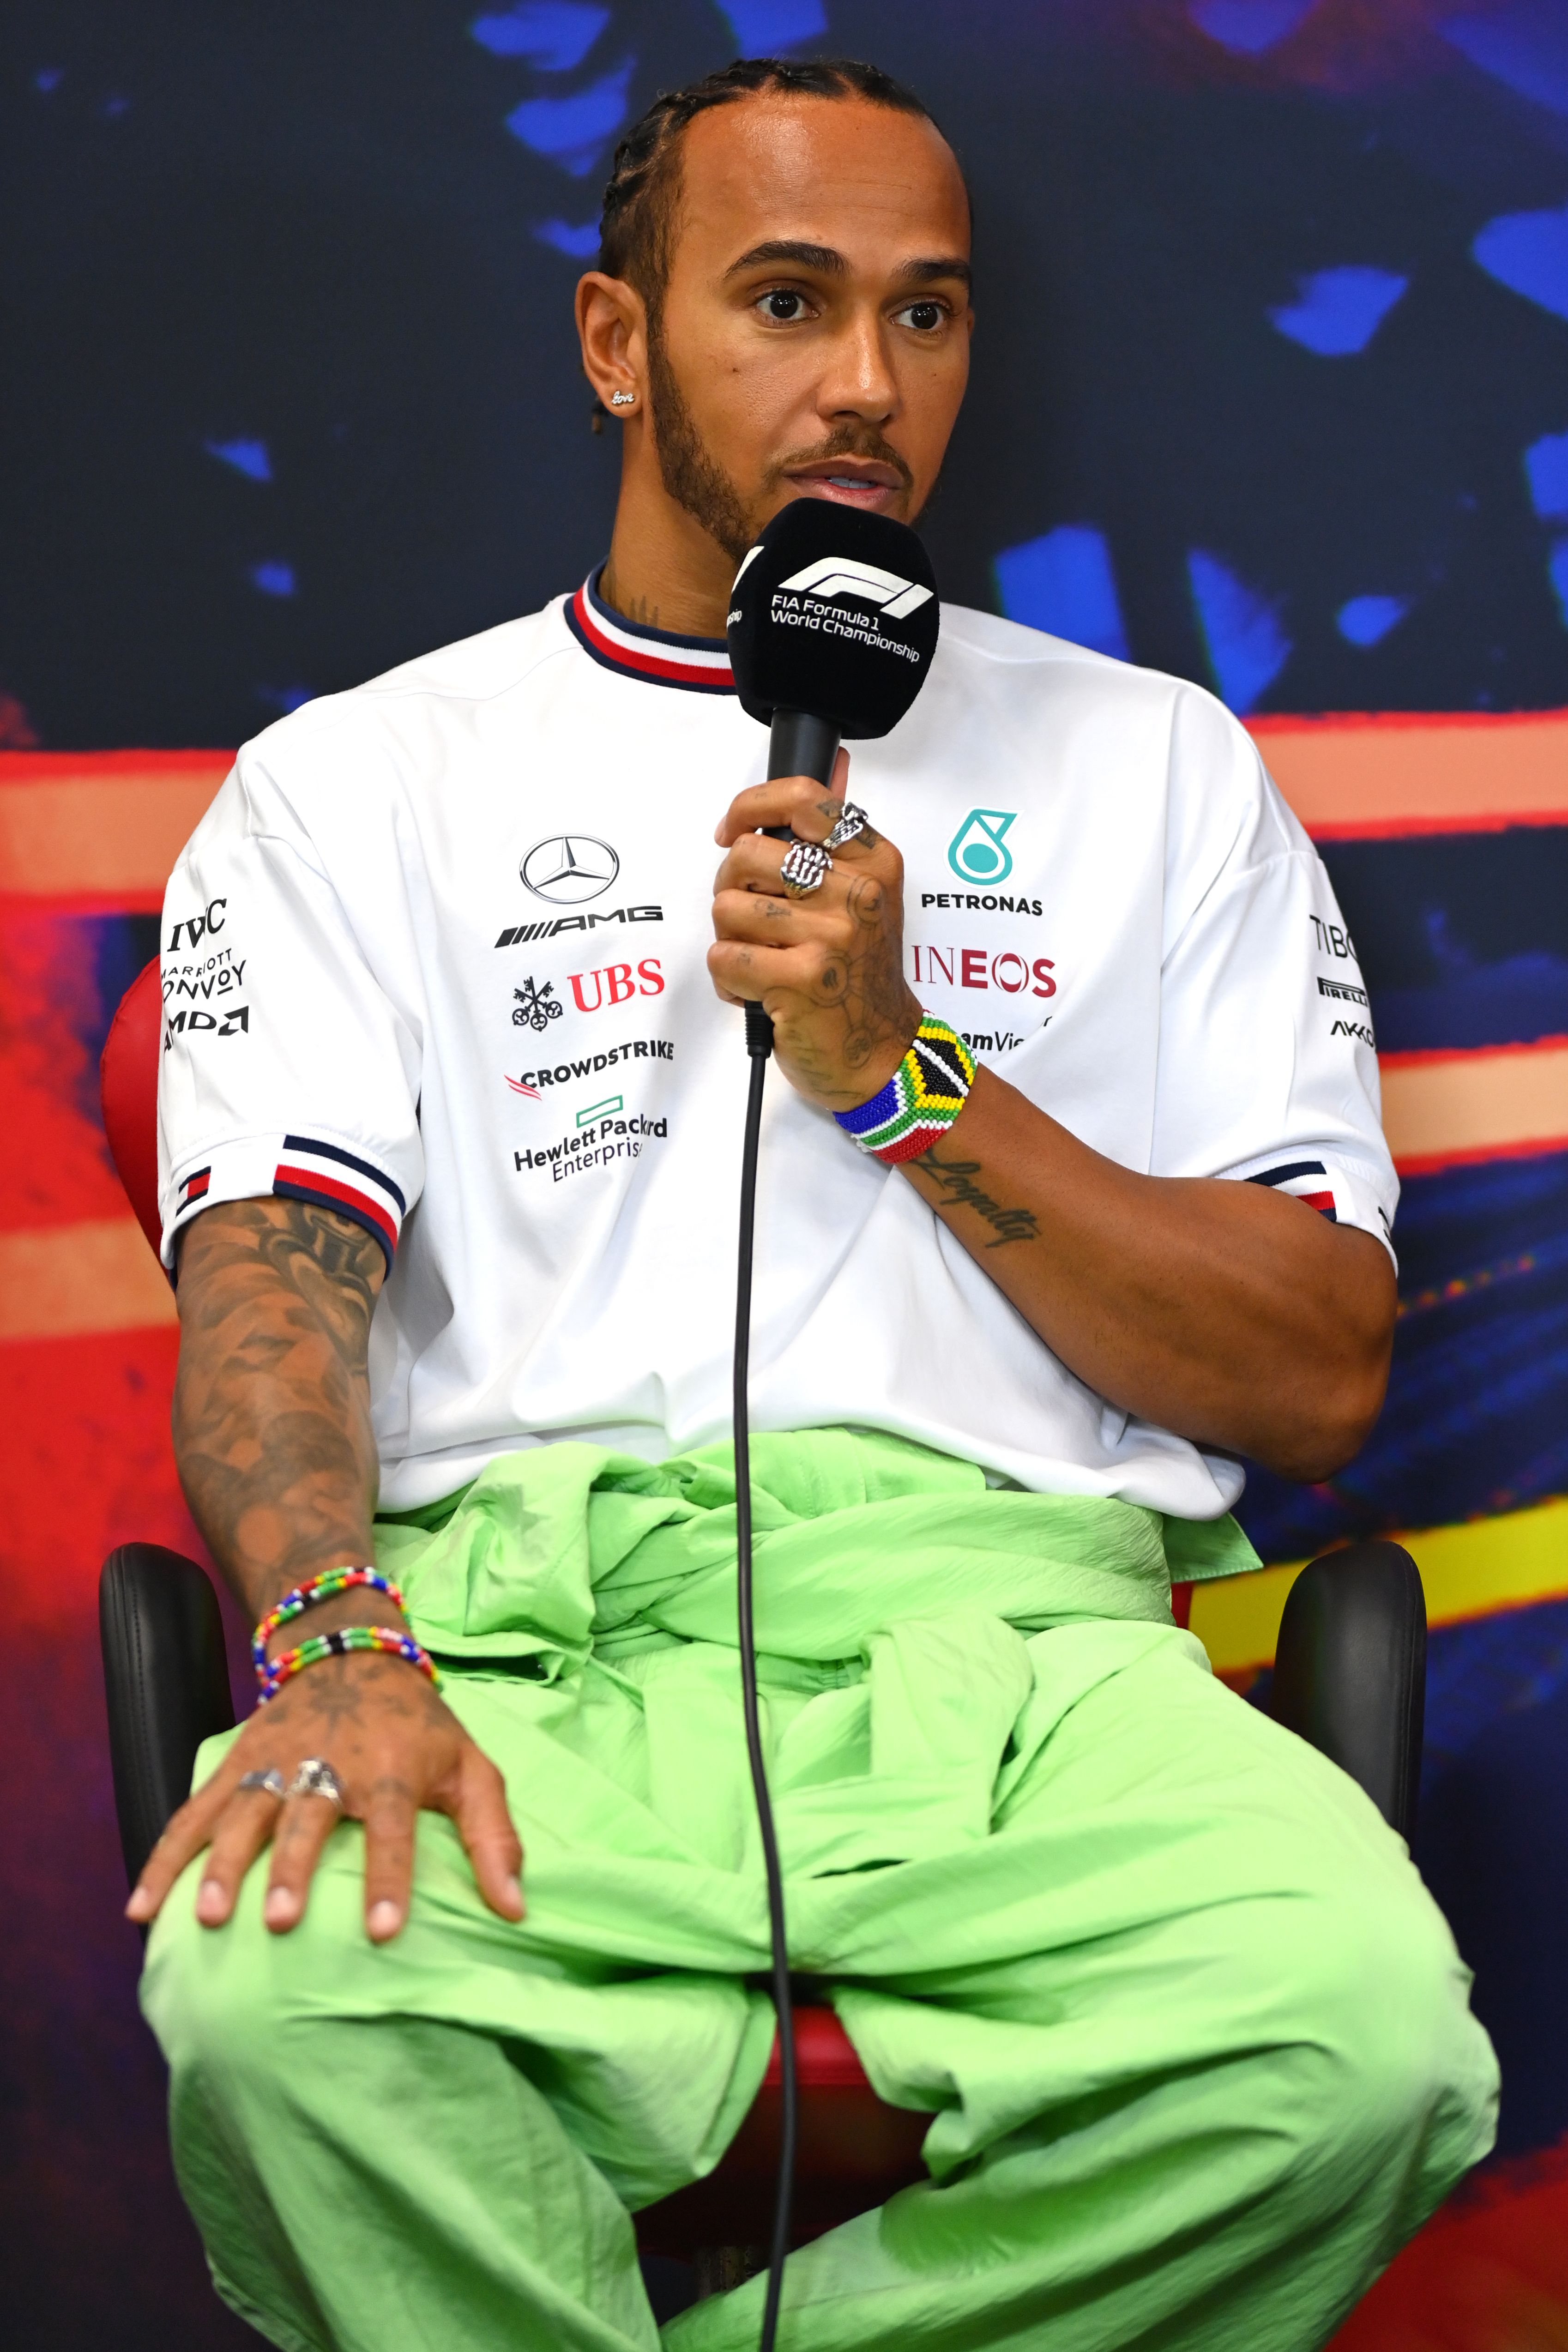 Belgian GP: Lewis Hamilton's dig at Fernando Alonso that wasn't shown on TV